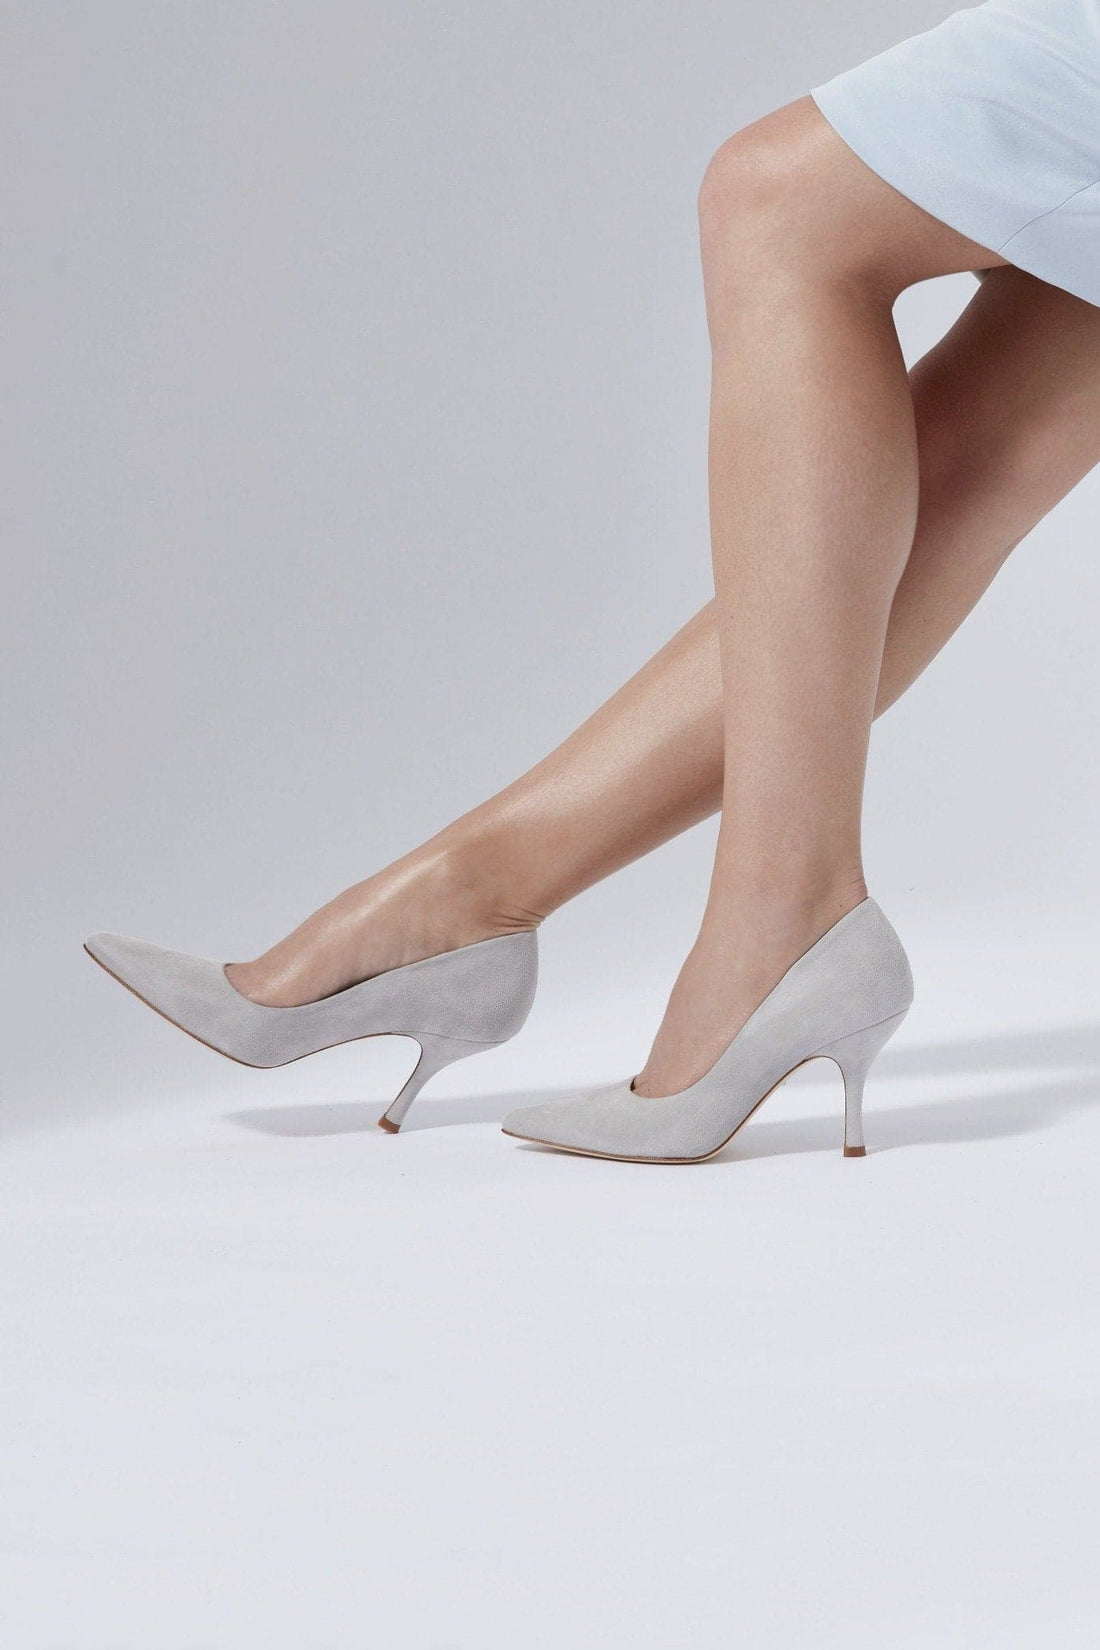 Olivia Vapour Fashion Shoe Light Grey Suede Pointed Court Shoes